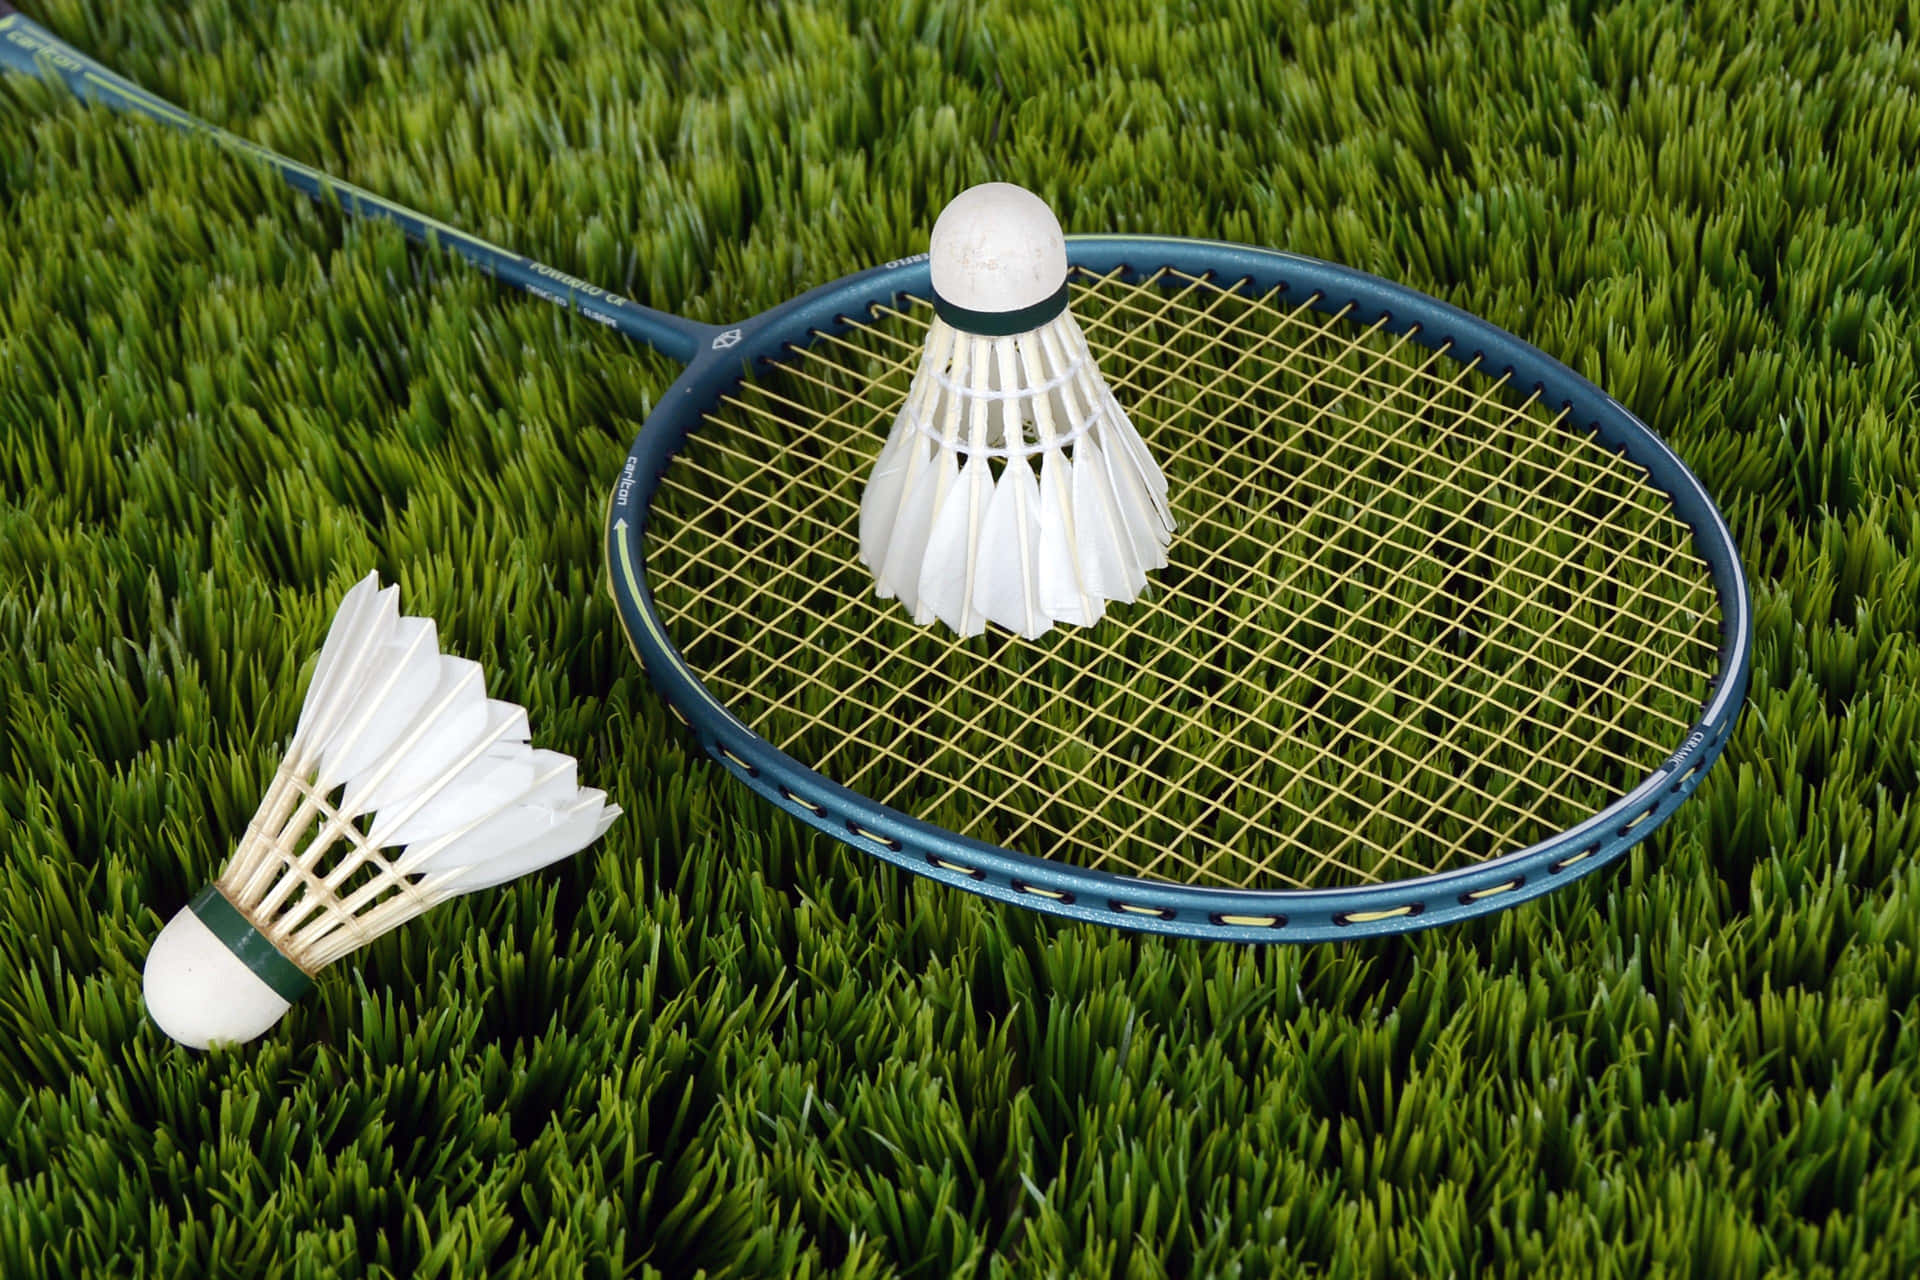 Go beyond your limits with HD Badminton